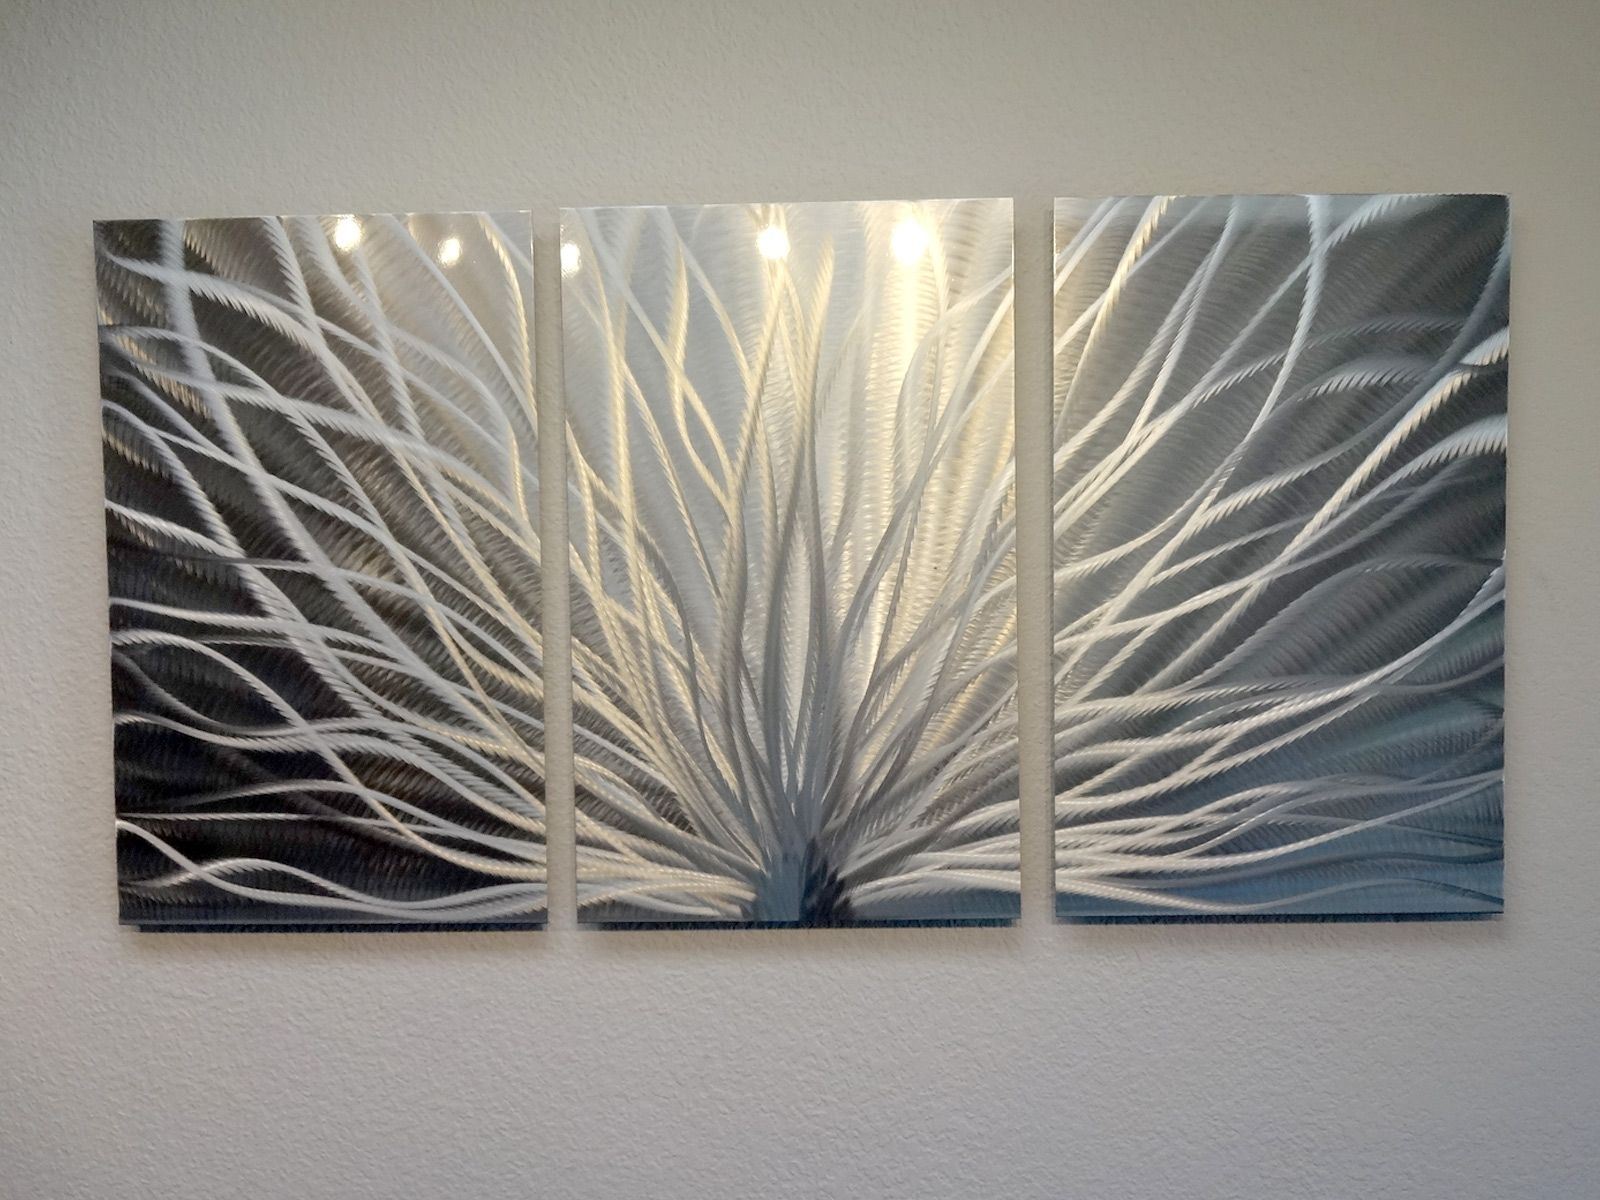 Radiance – 3 Panel Metal Wall Art Abstract Contemporary Modern Regarding Most Up To Date Abstract Canvas Wall Art Iii (View 14 of 20)